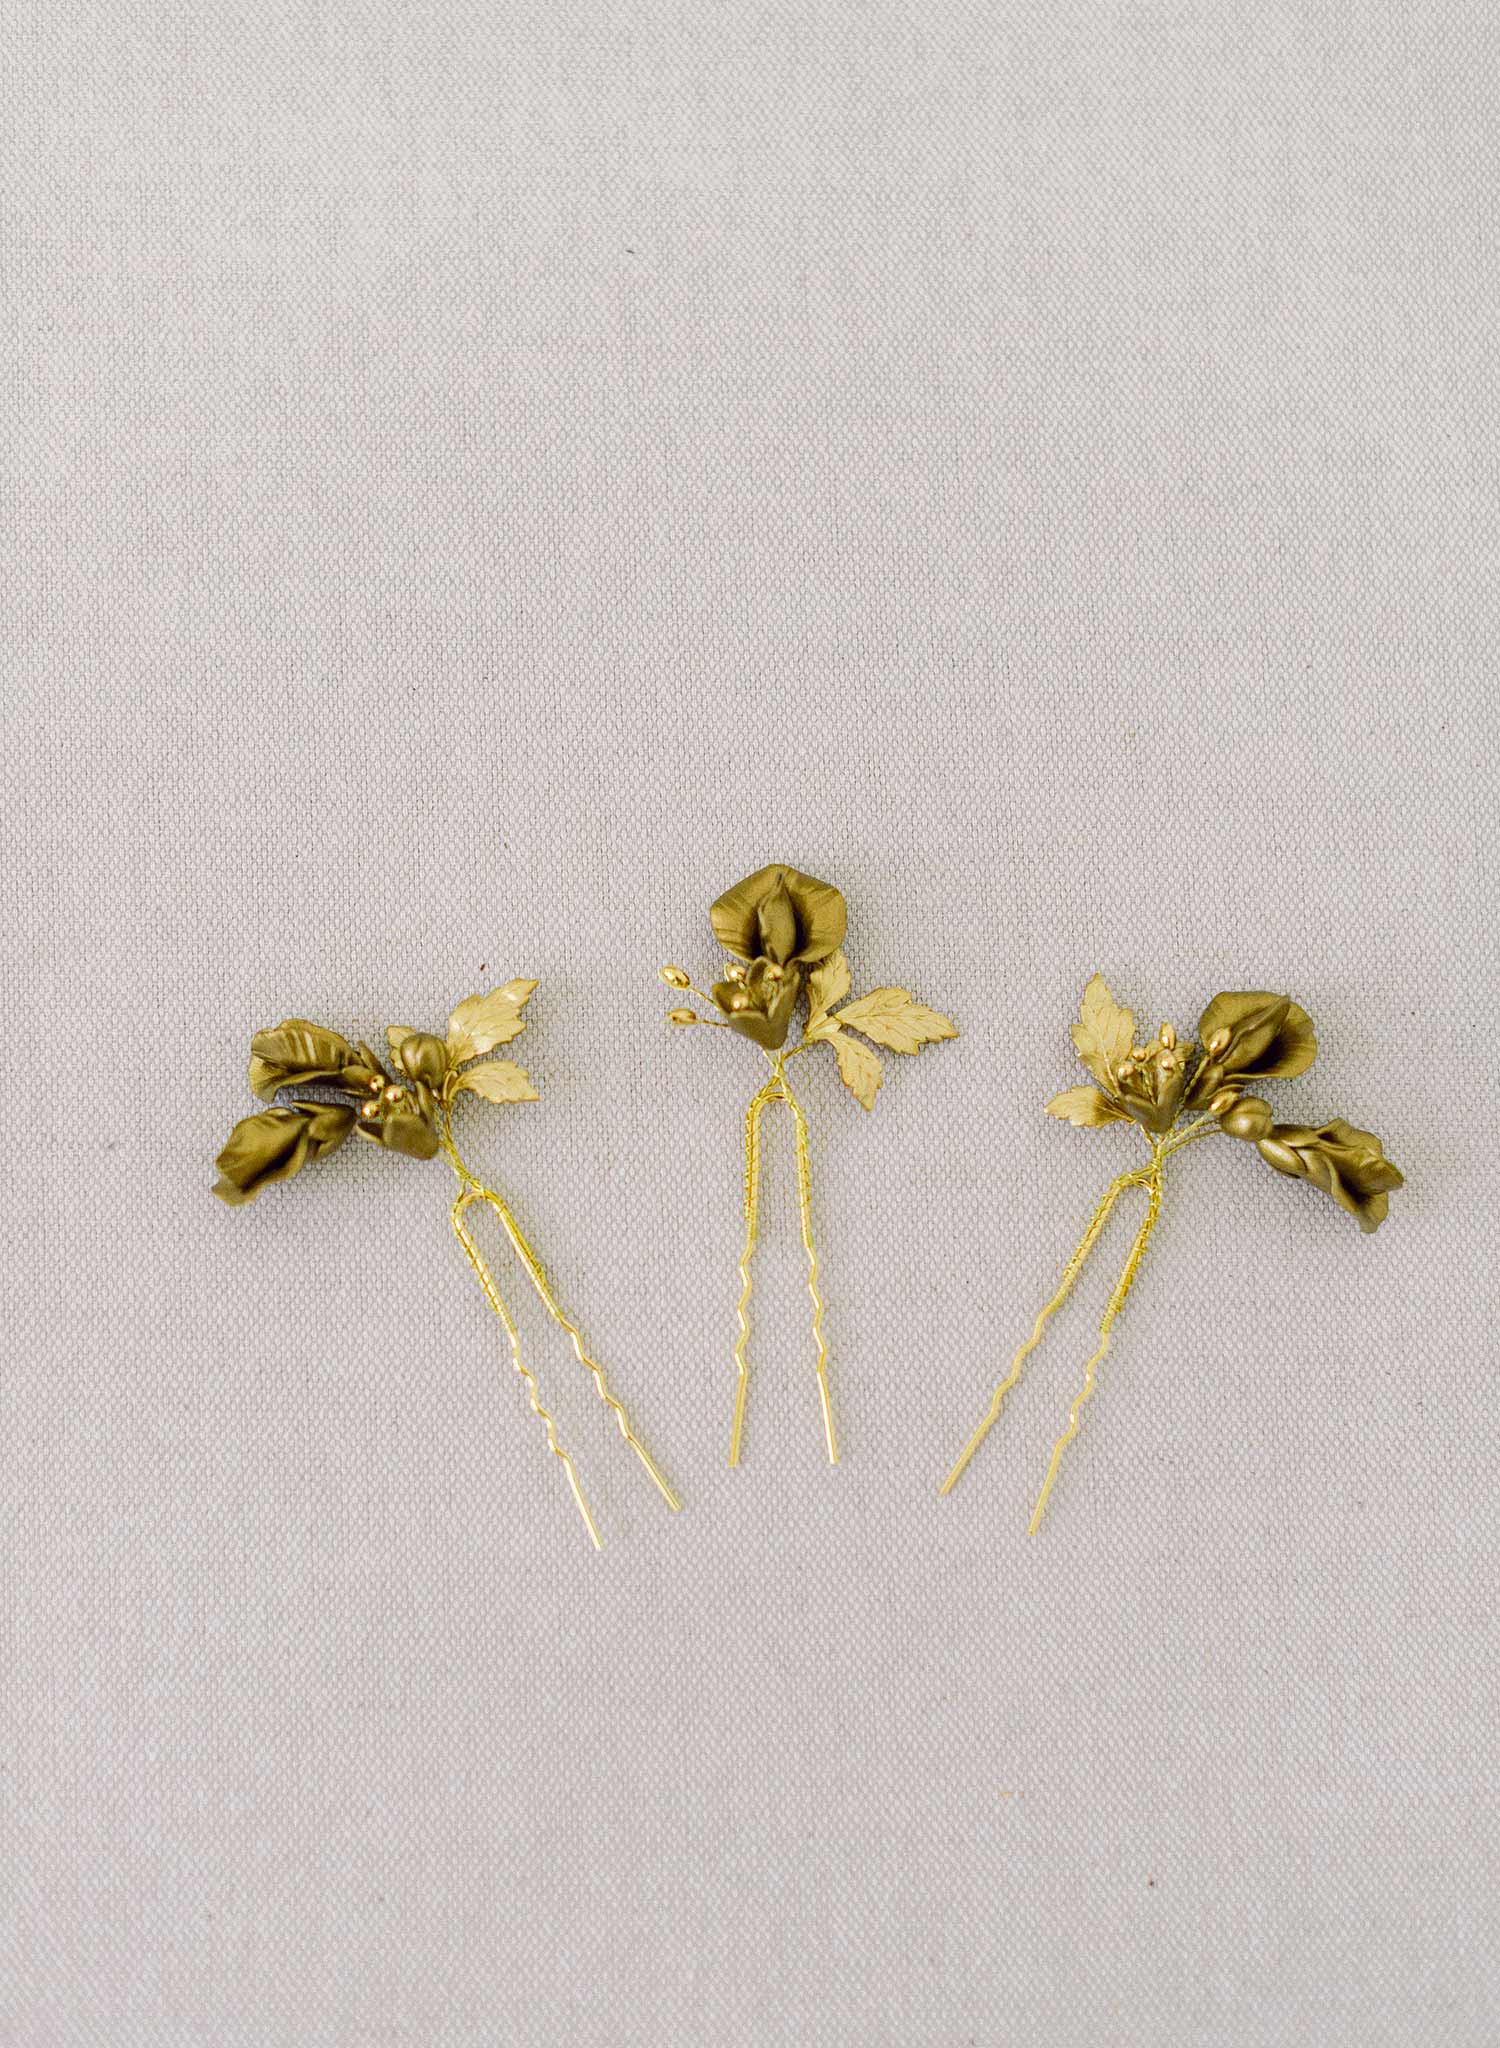 Gilded sweet pea pin set of 3 - Style #2323